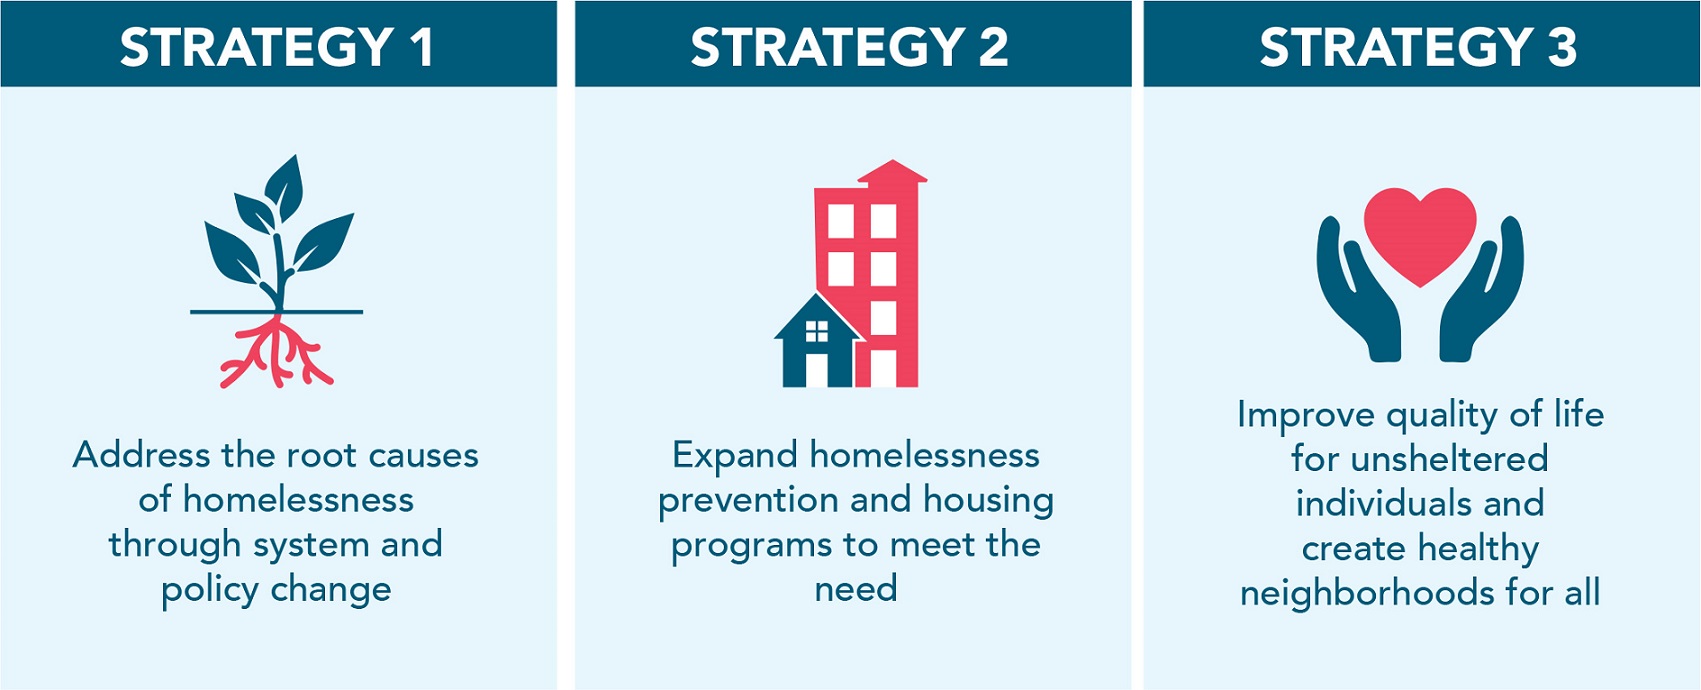 An infographic showing the roadmap for ending homelessness is organized around three core strategies. Strategy 1: Addressing the root cause of homelessness, Strategy 2: Expand homelessness prevention and Strategy 3: Improve quality of life for unsheltered individuals